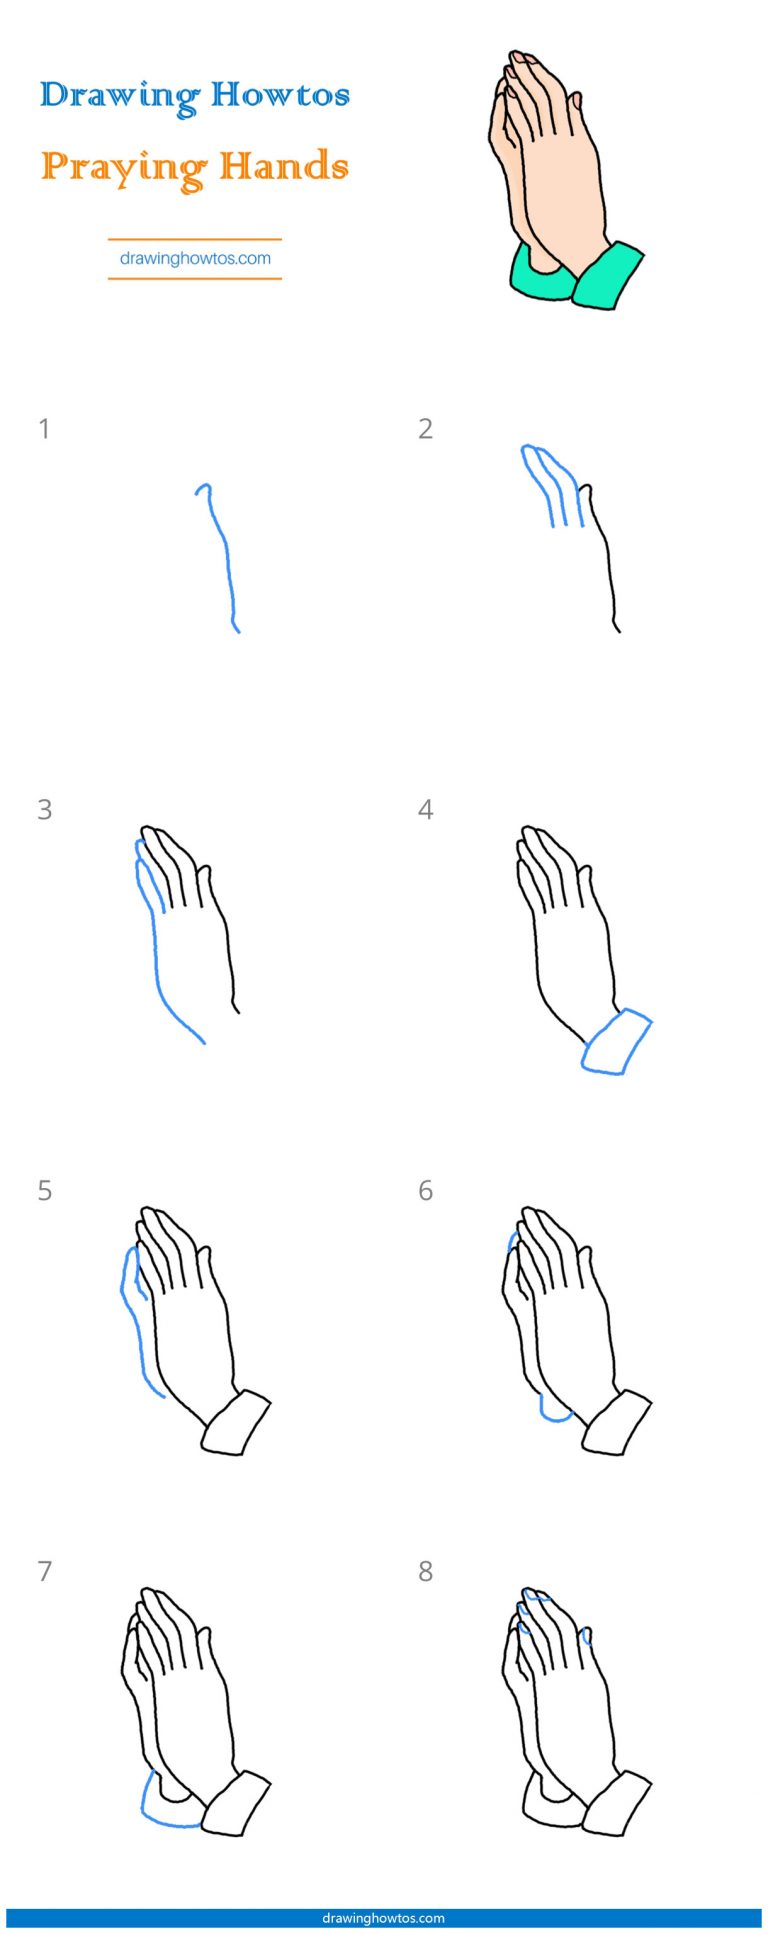 How to Draw Praying Hands - Step by Step Easy Drawing Guides - Drawing ...